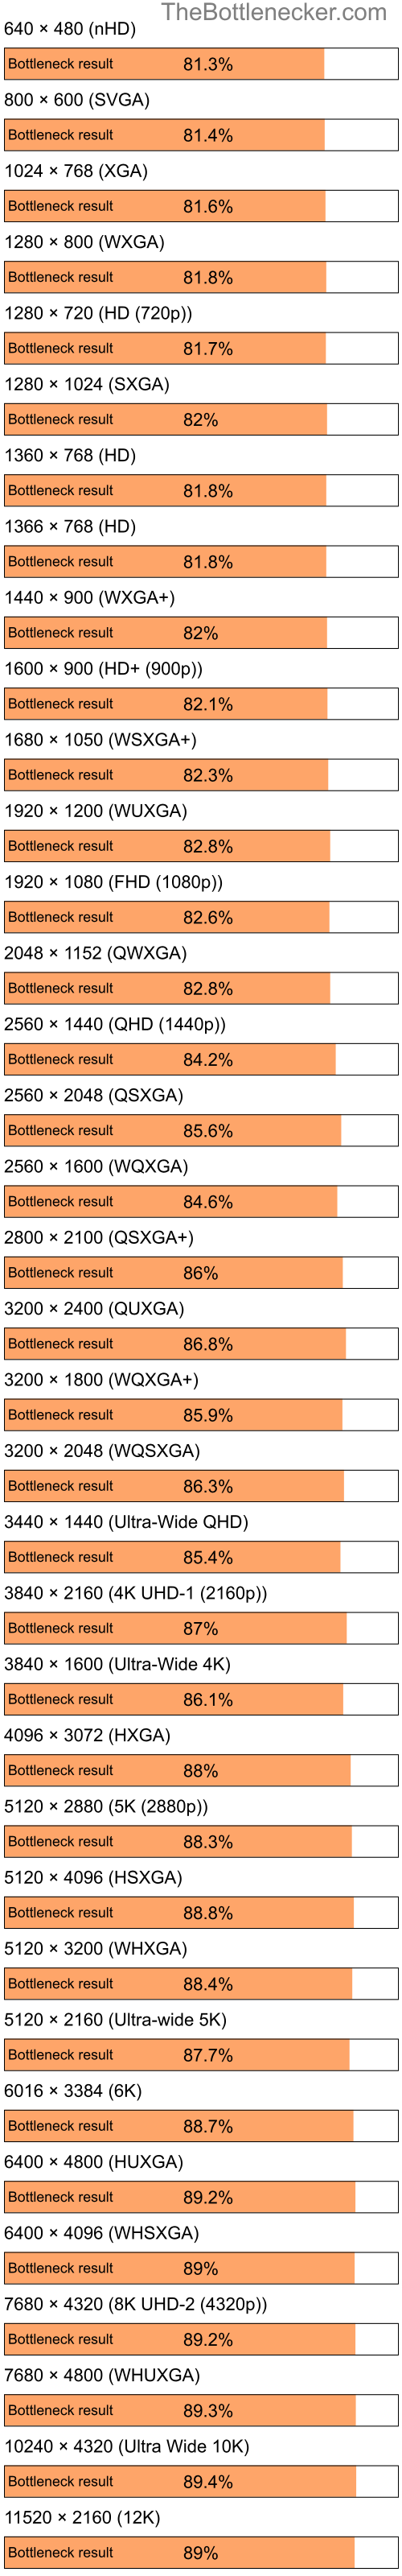 Bottleneck results by resolution for Intel Celeron and NVIDIA GeForce 7025 in Graphic Card Intense Tasks